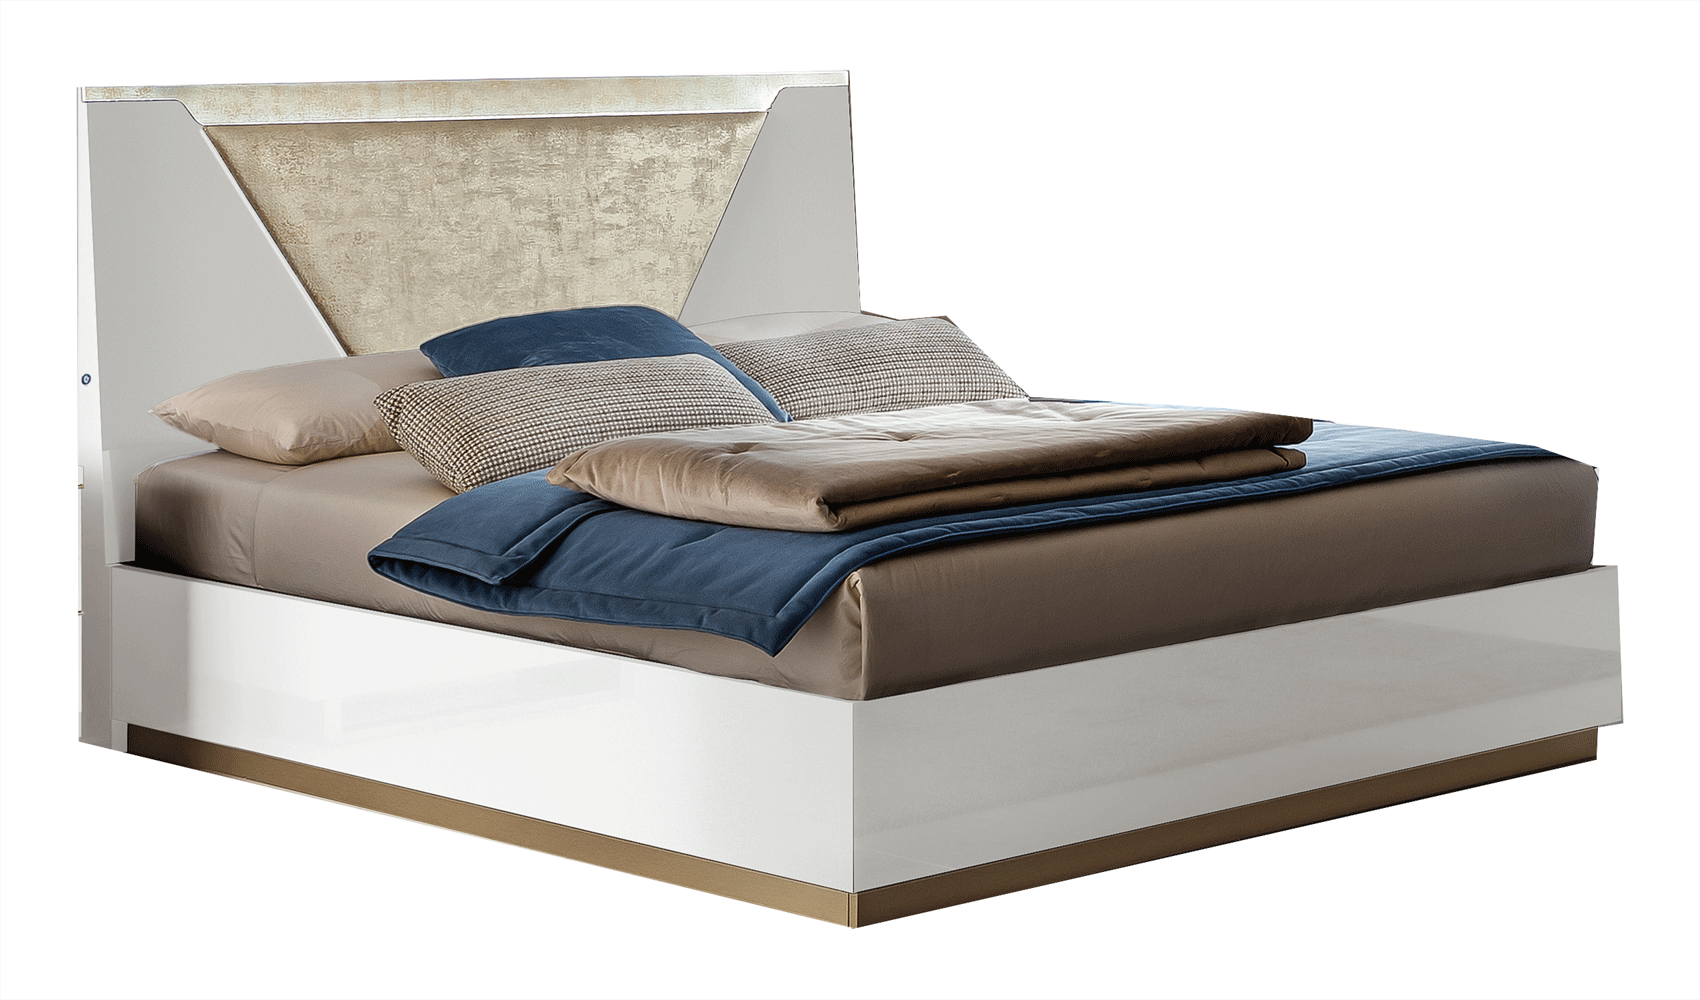 Clearance Bedroom Smart Bed White